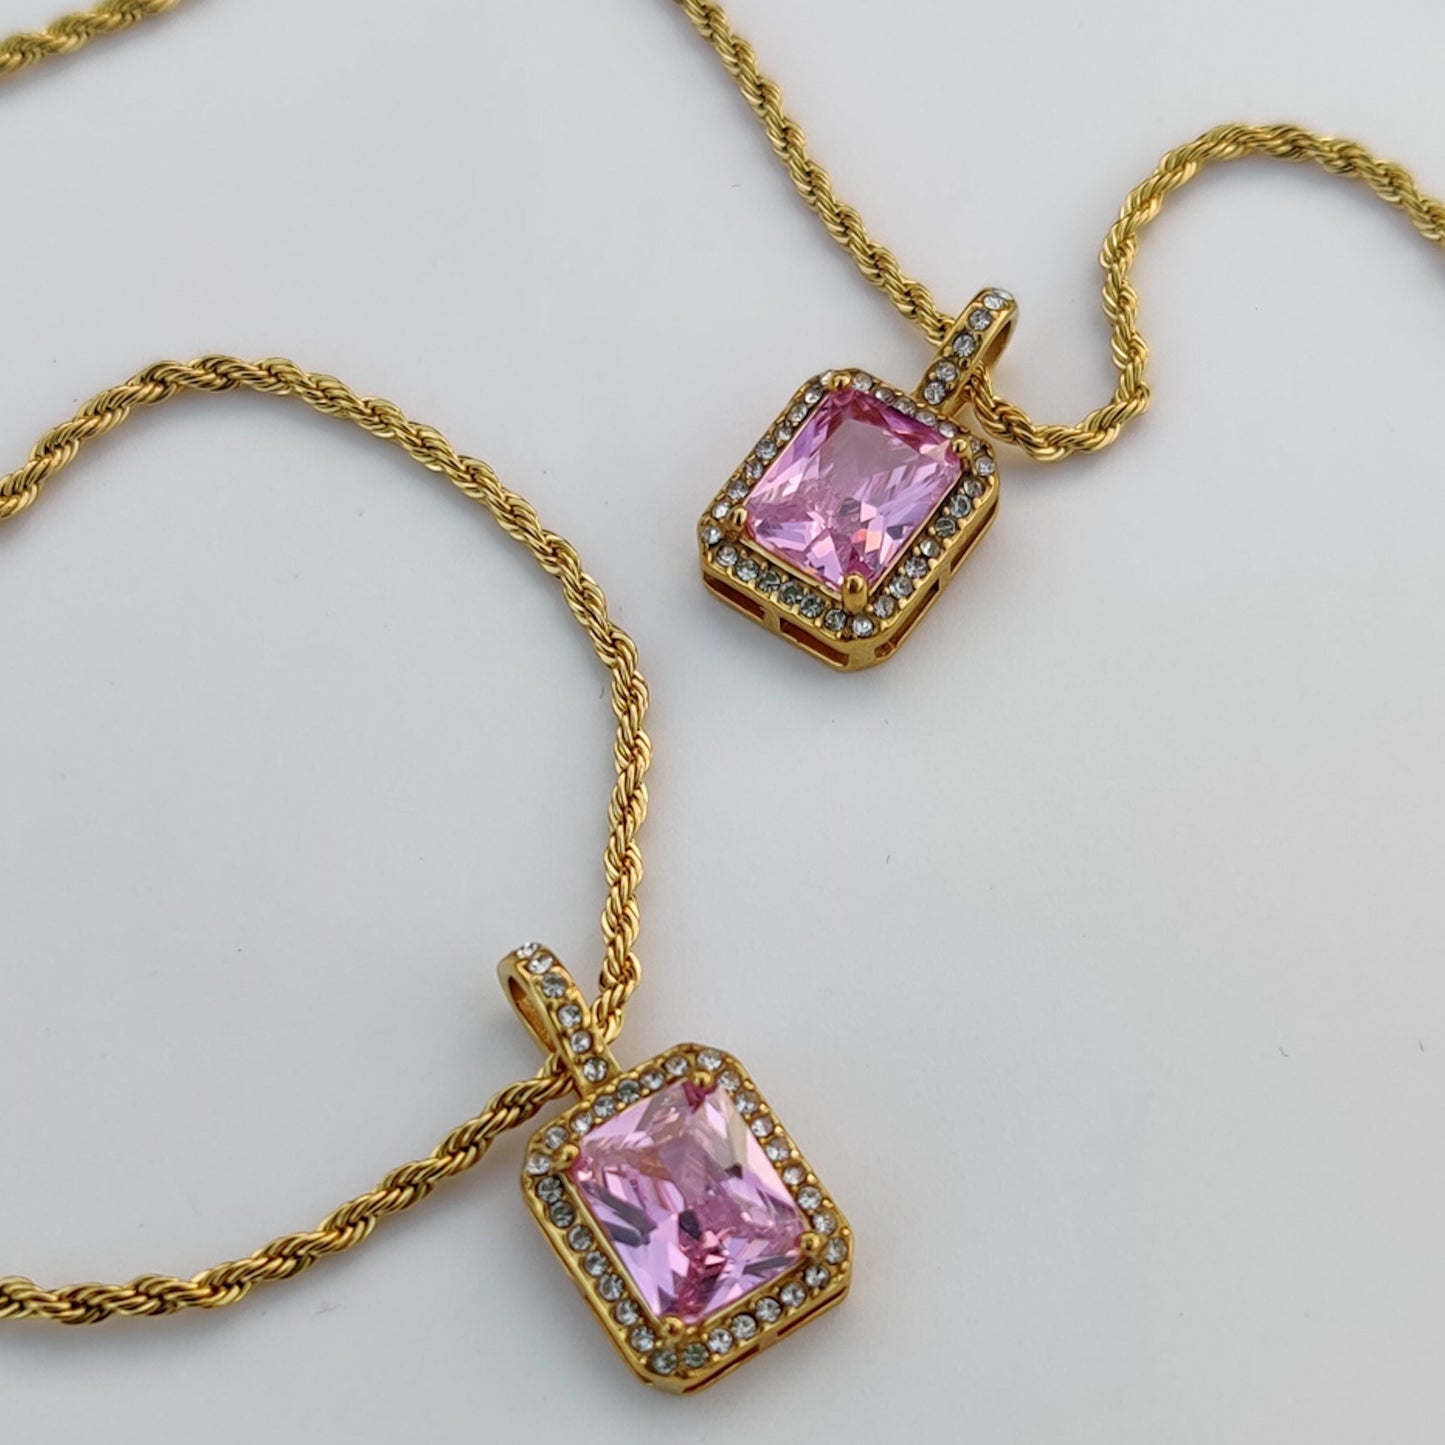 The Empress Necklace